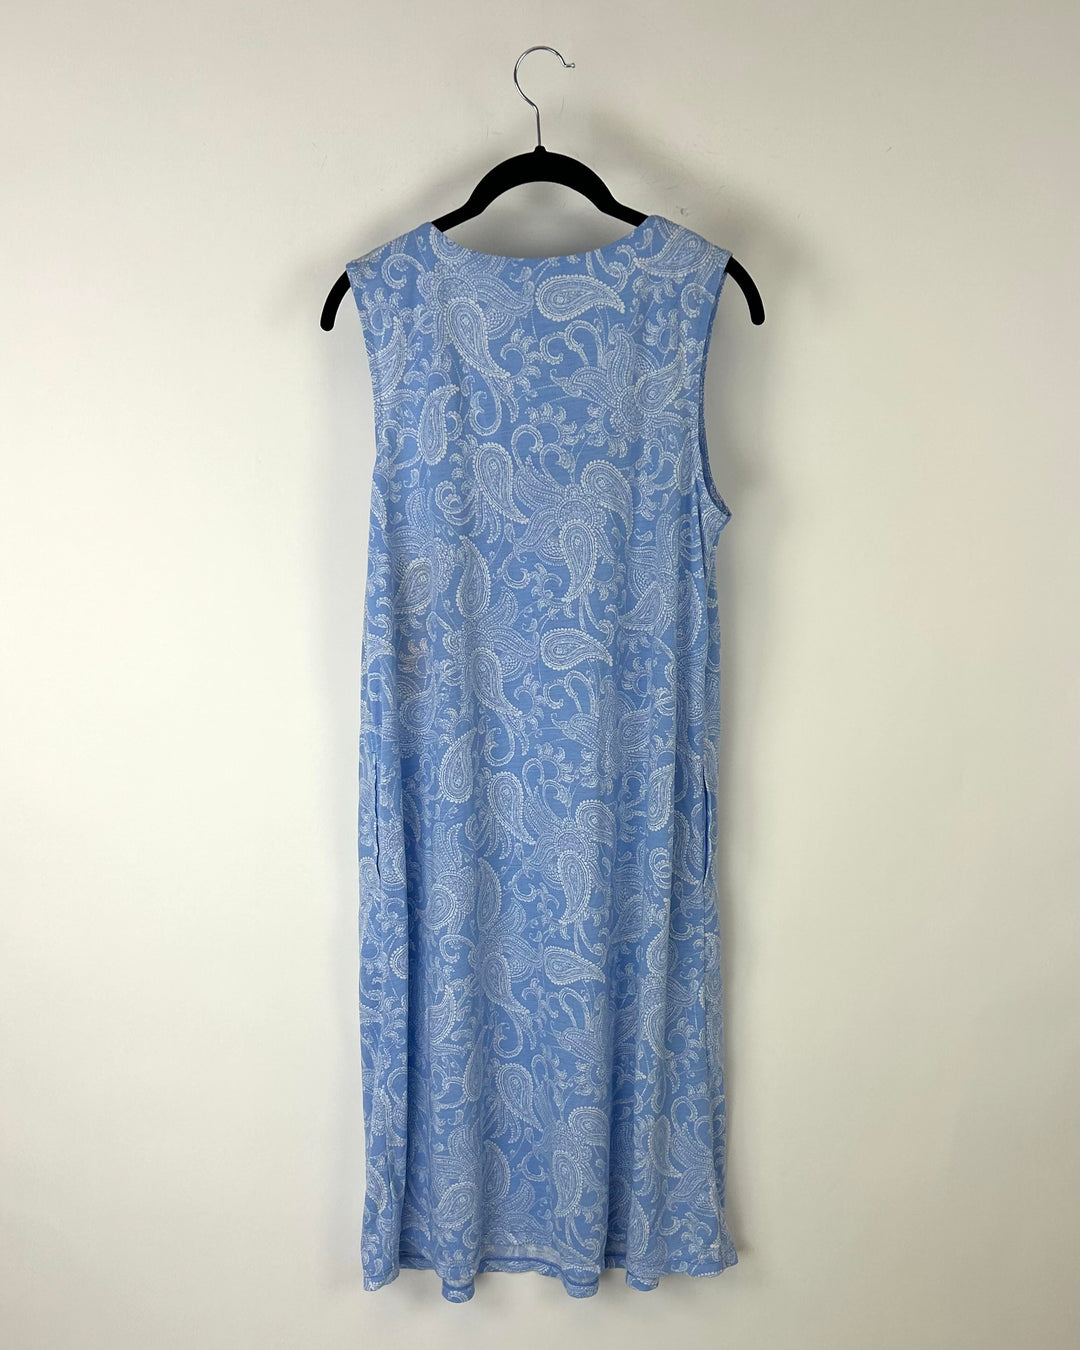 Blue and White Printed Nightgown - Size 8-10